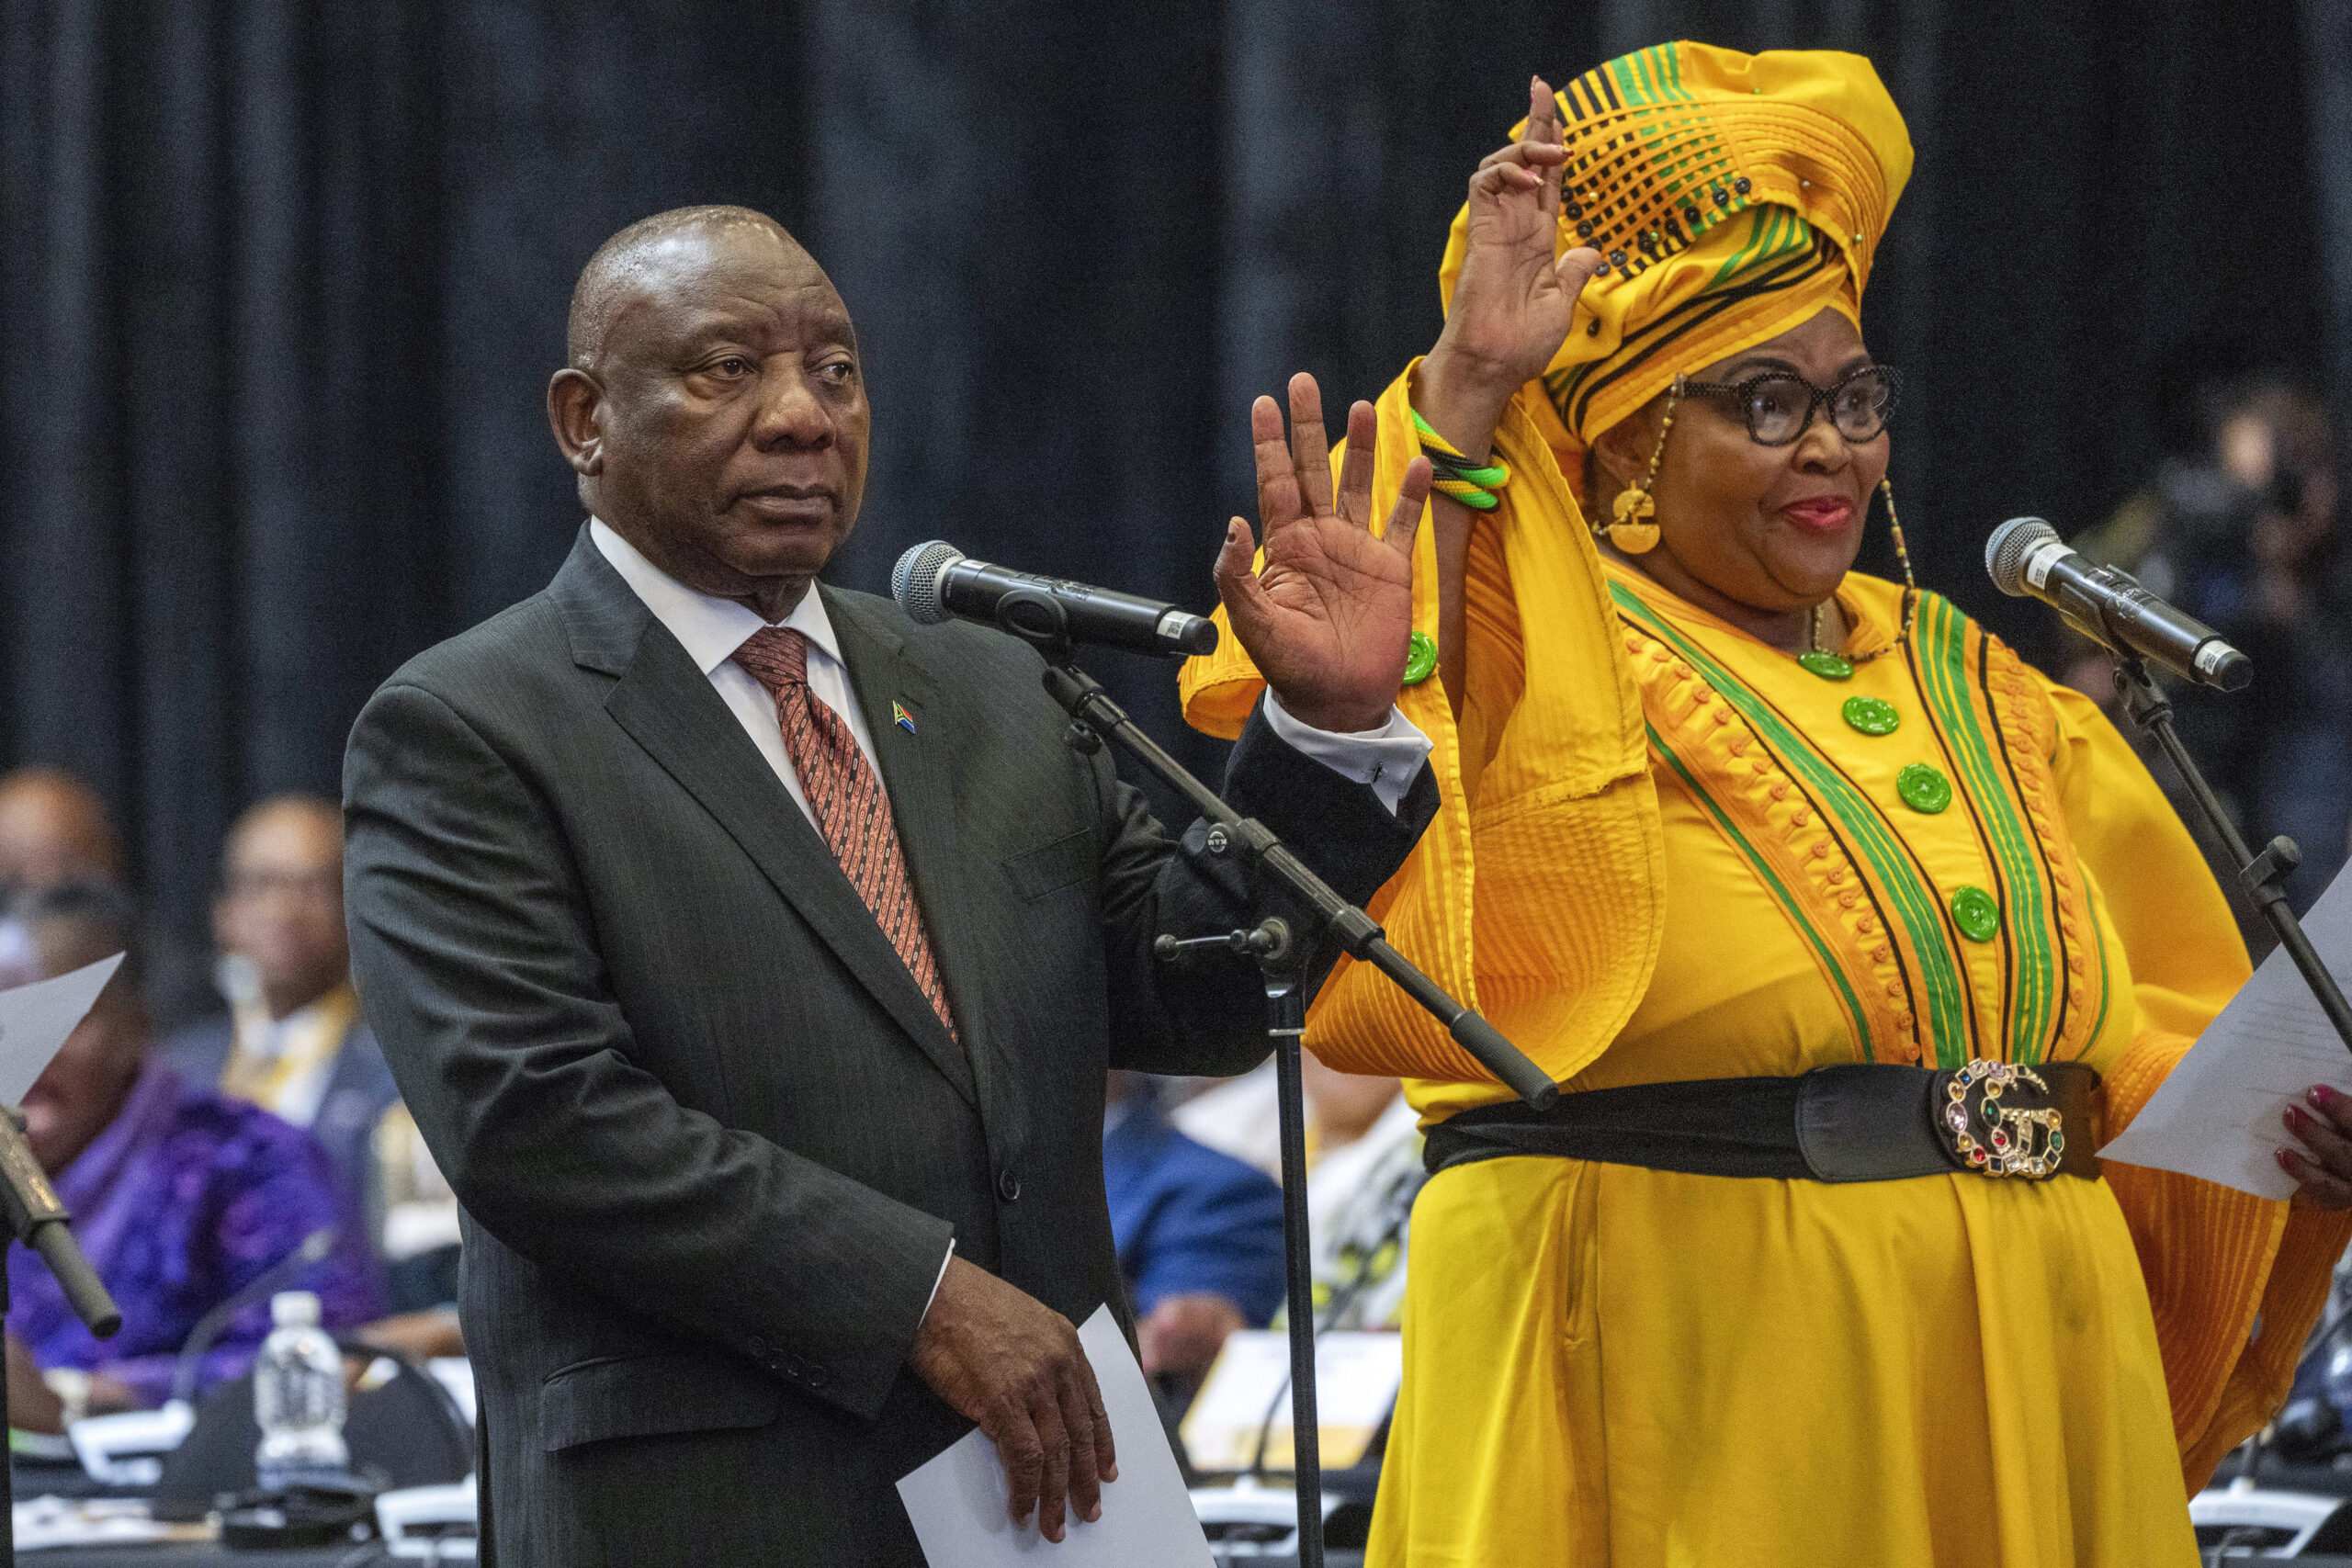 South African président Cyril Ramaphosa raises his hand as he is sworn is as a member of Parliament ahead of the vote by lawmakers to reelect him as leader of the country in Cape Town, South Africa, Friday, June 14, 2024. At right is Pemmy Majodina, an ANC lawmaker. Photo credit: Jerome Delay, The Associated Press